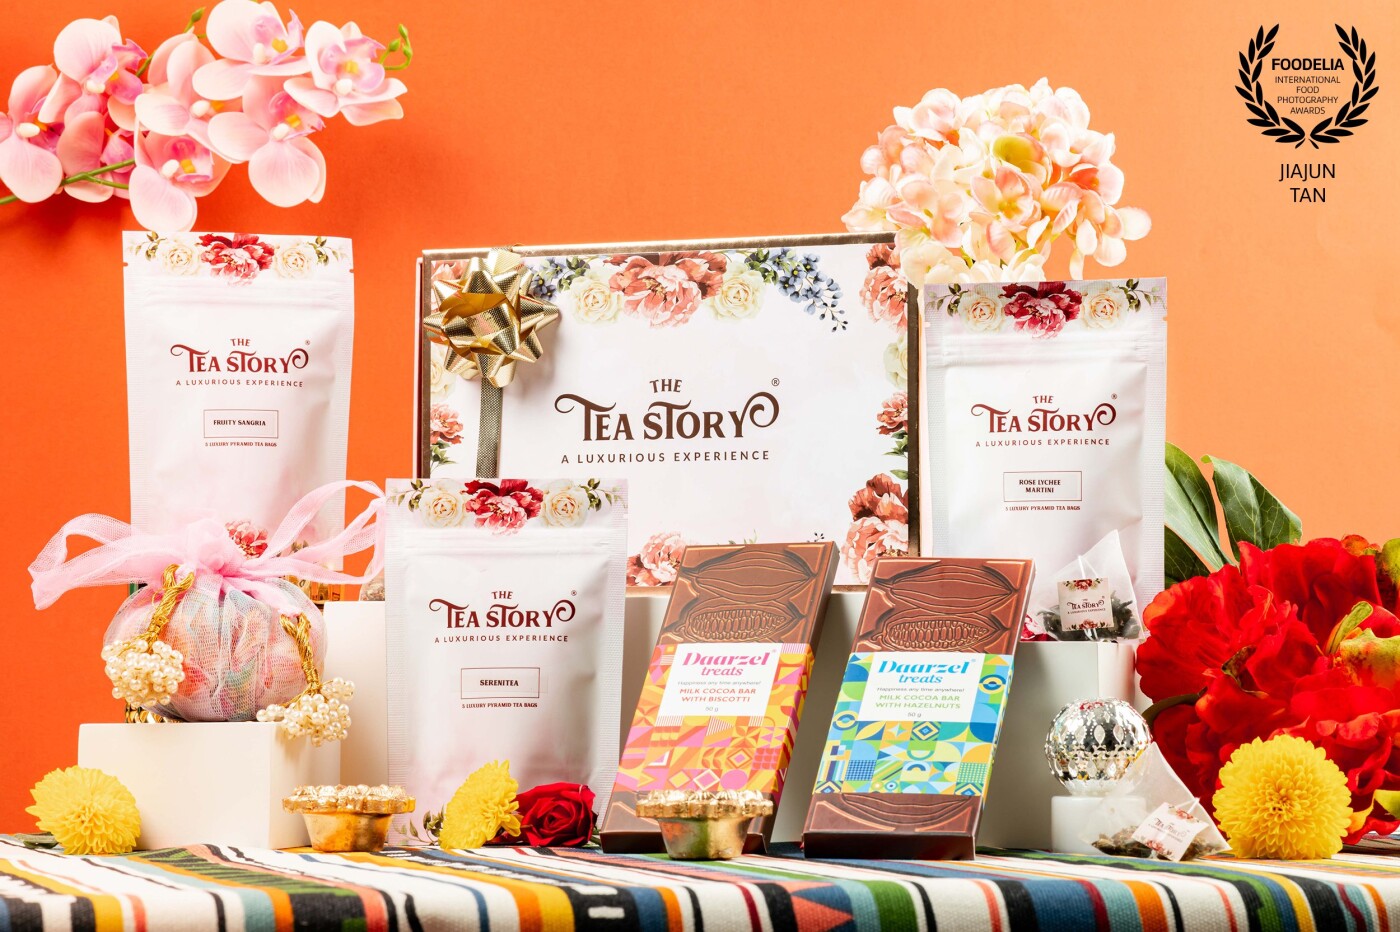 TheTeaStory Singapore Product Shoot by Jiajun from Sparkstudio SG - Bright colourful concept that brings people a feeling of joy and relaxing. <br />
Instagram: @jsquaress